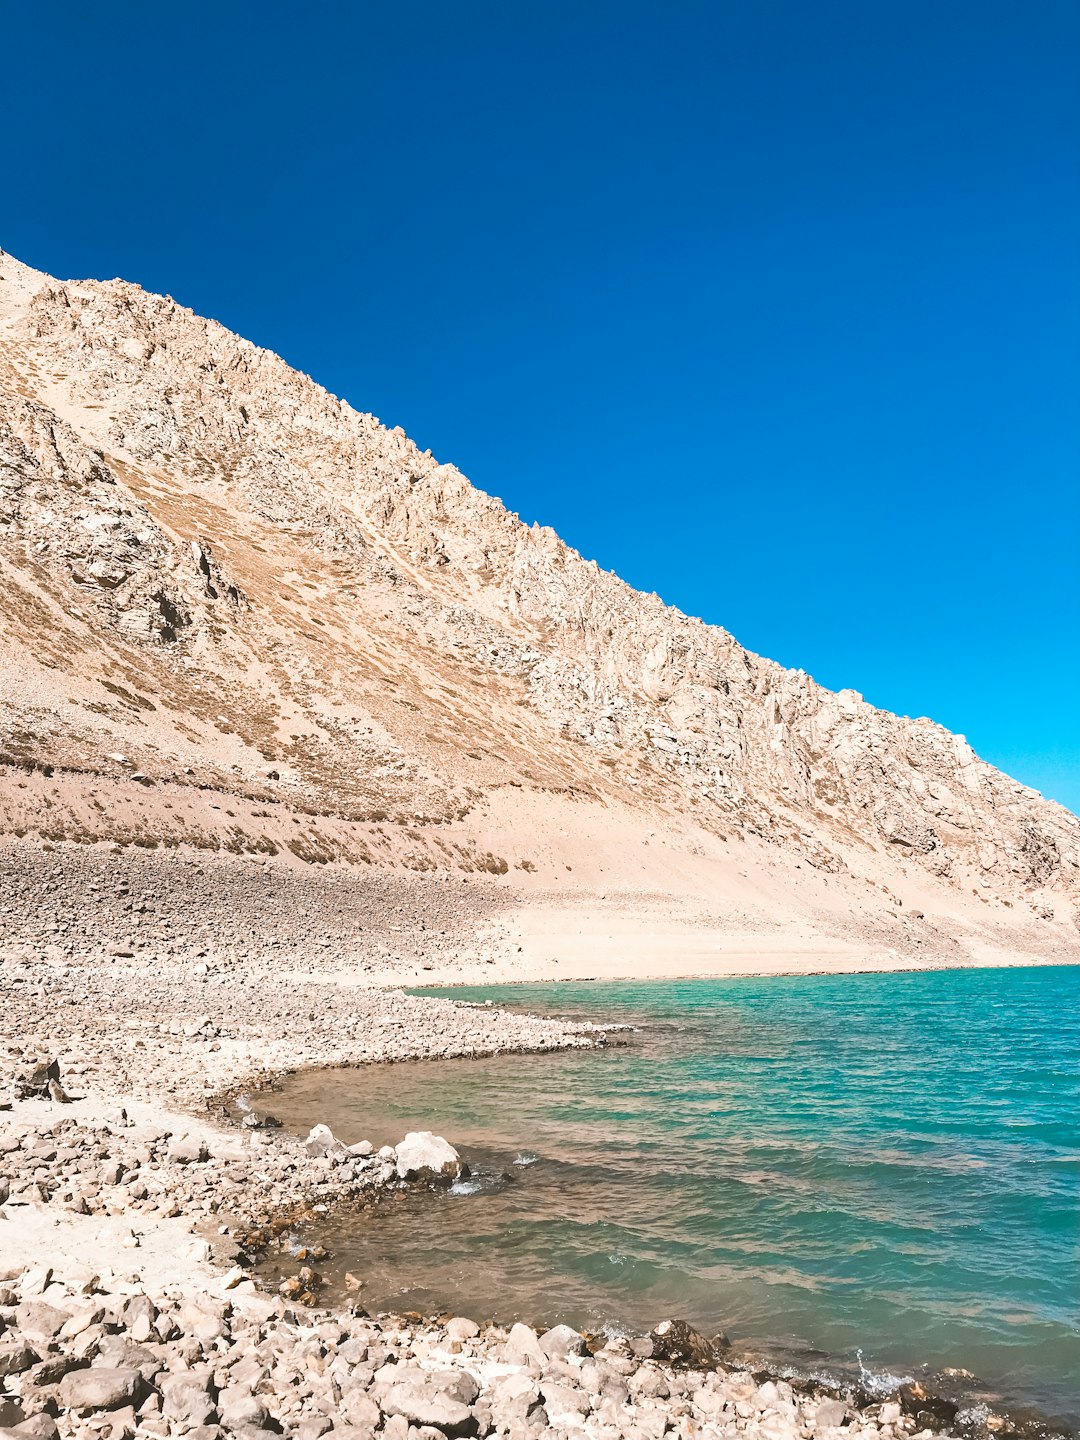 Travel Tips and Stories of Embalse el Yeso in Chile